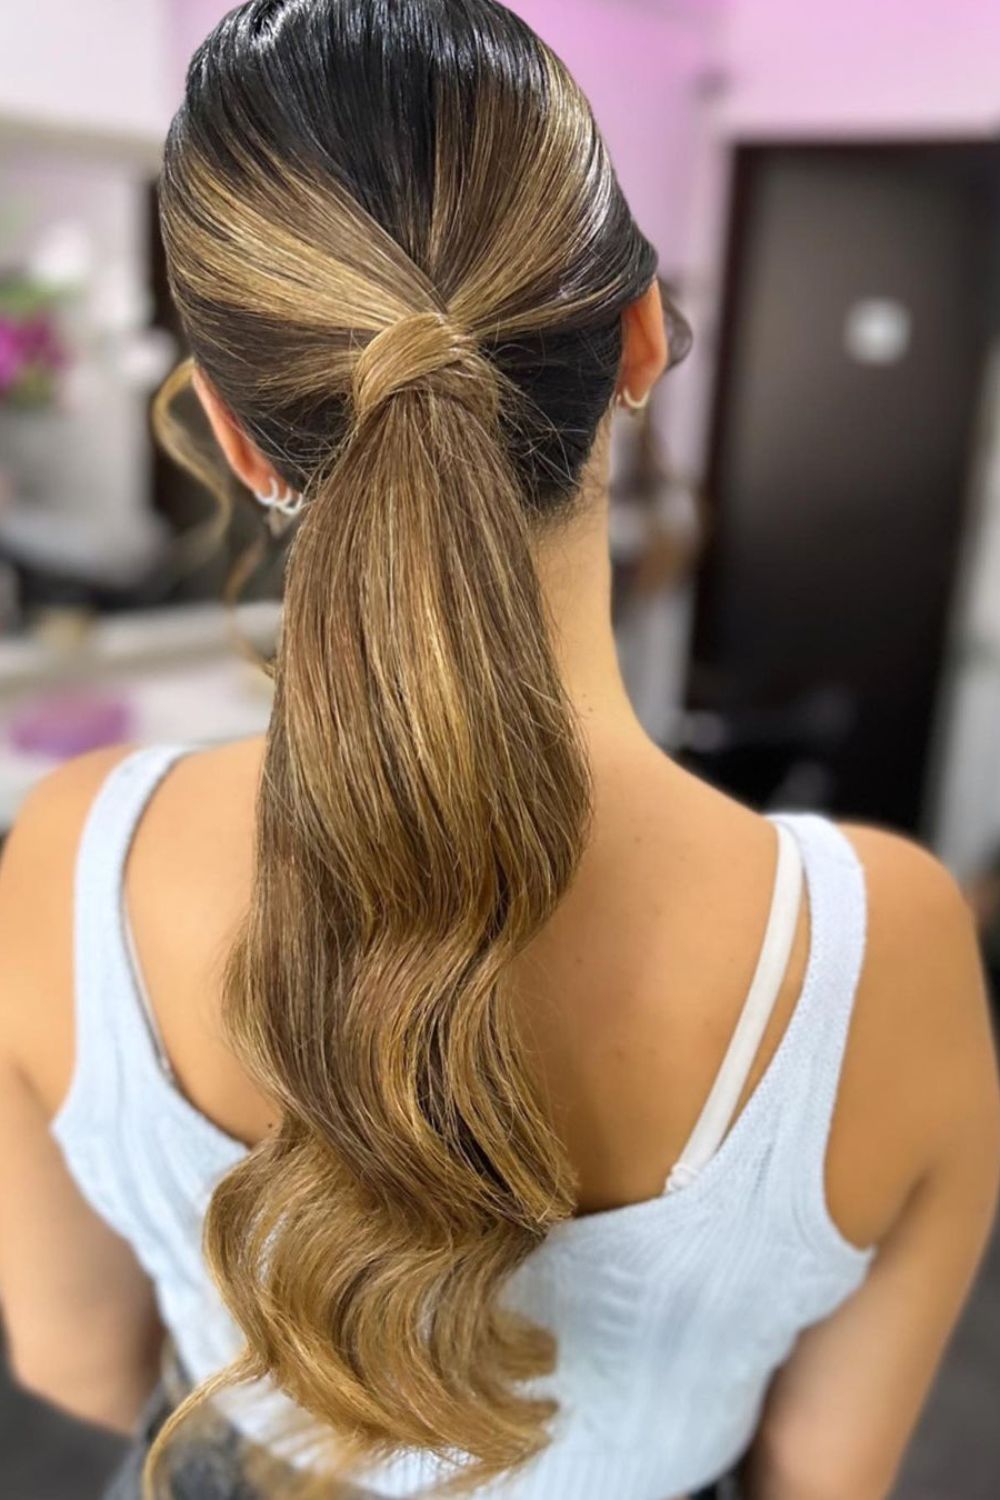 A woman with a long, blonde, low ponytail.